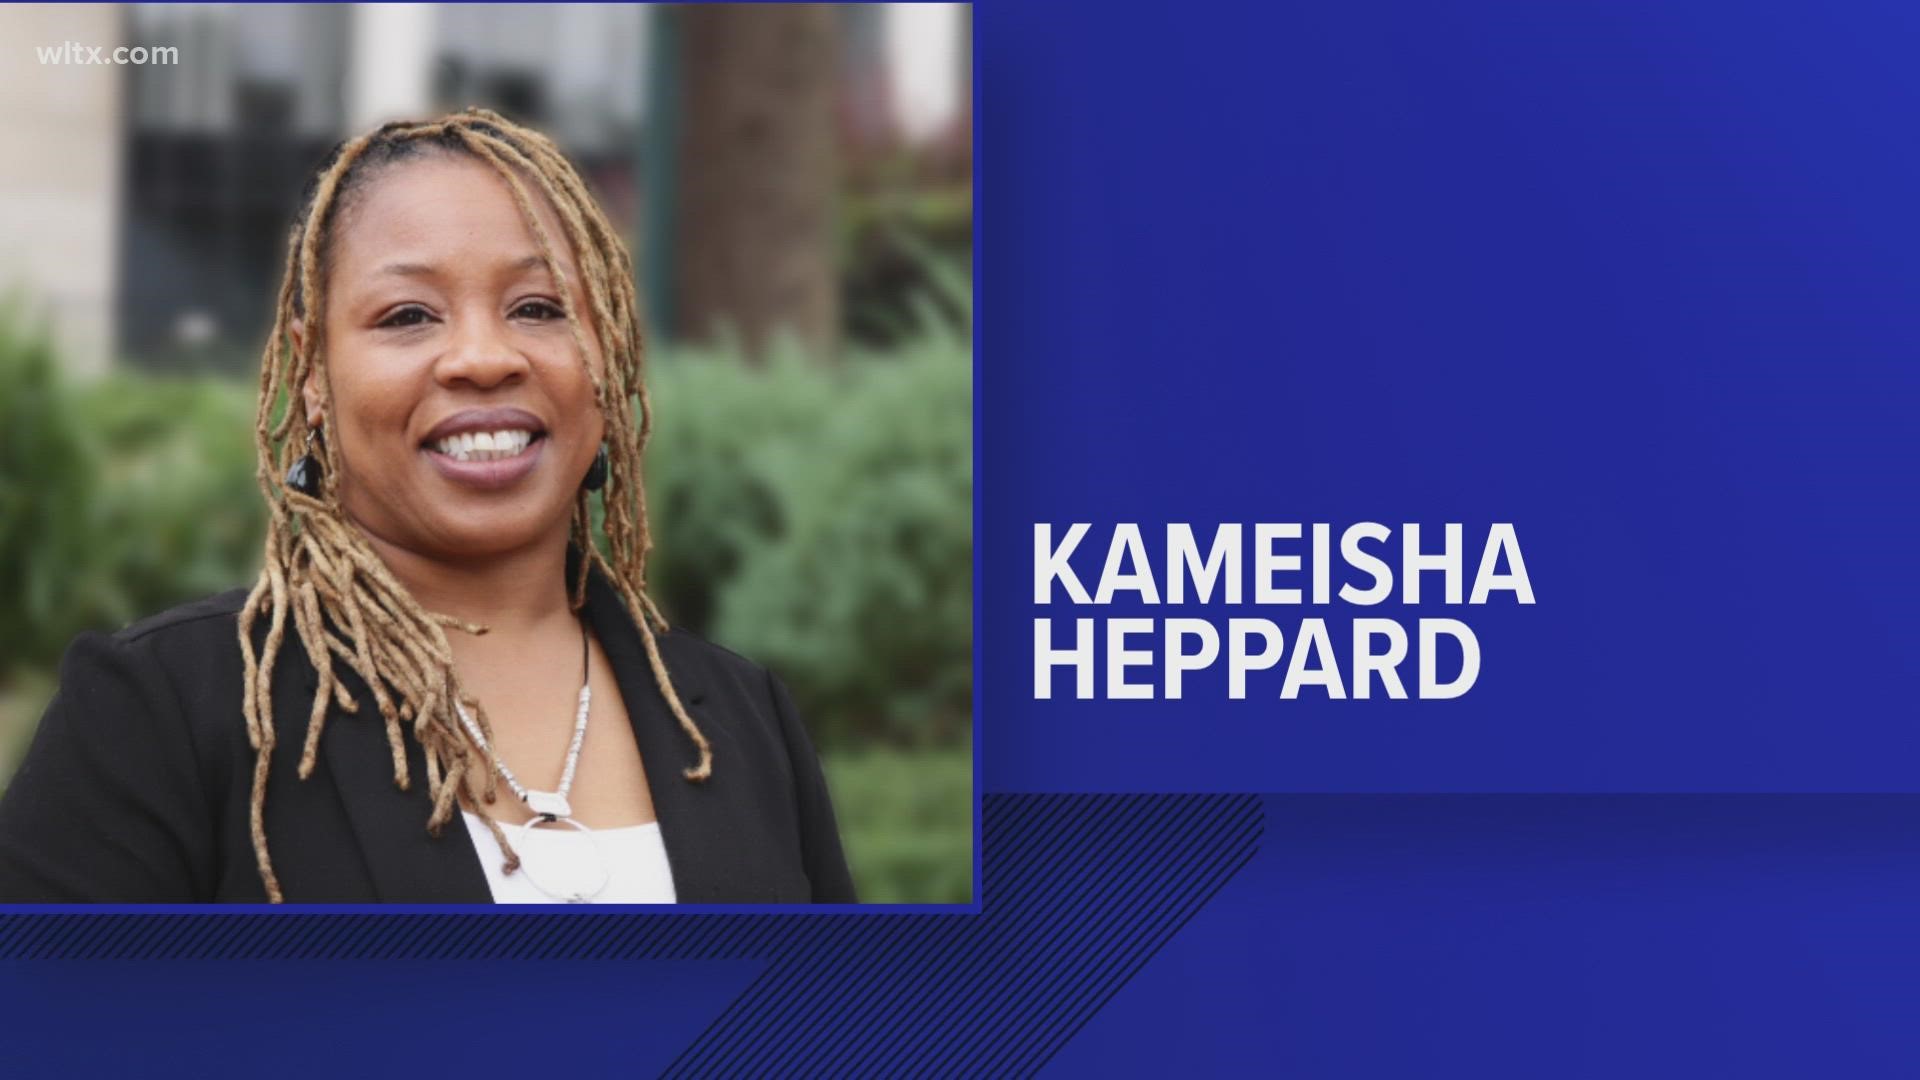 Kameisha Heppard will be Director of Homeless Services and Mackin Wall will serve as Homeless Services Project Manager.